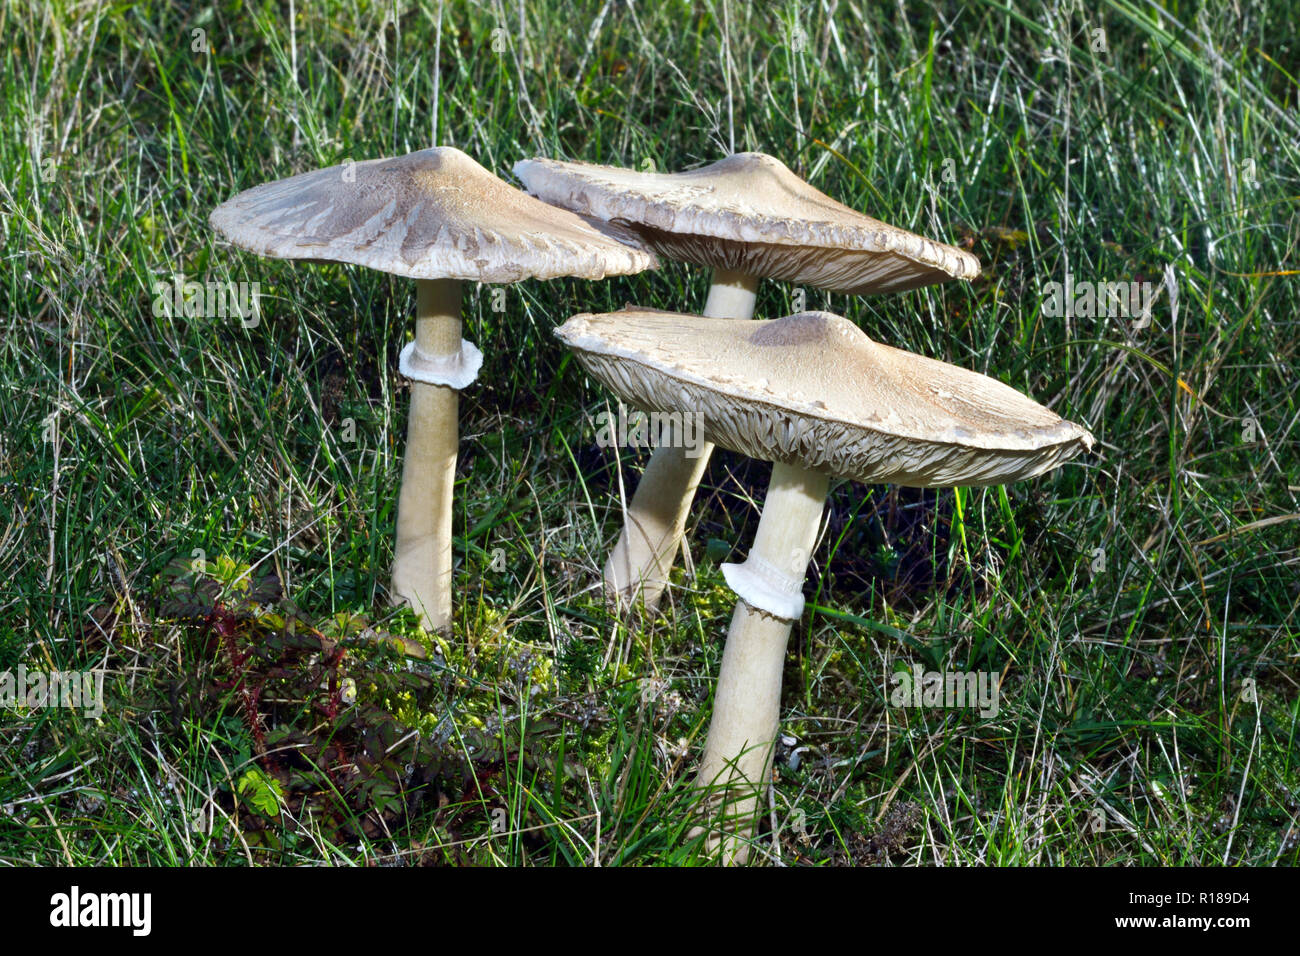 Macrolepiota konradii is a species of fungus or toadstool that can be found in pastureland but is here growing in dune grassland. Stock Photo